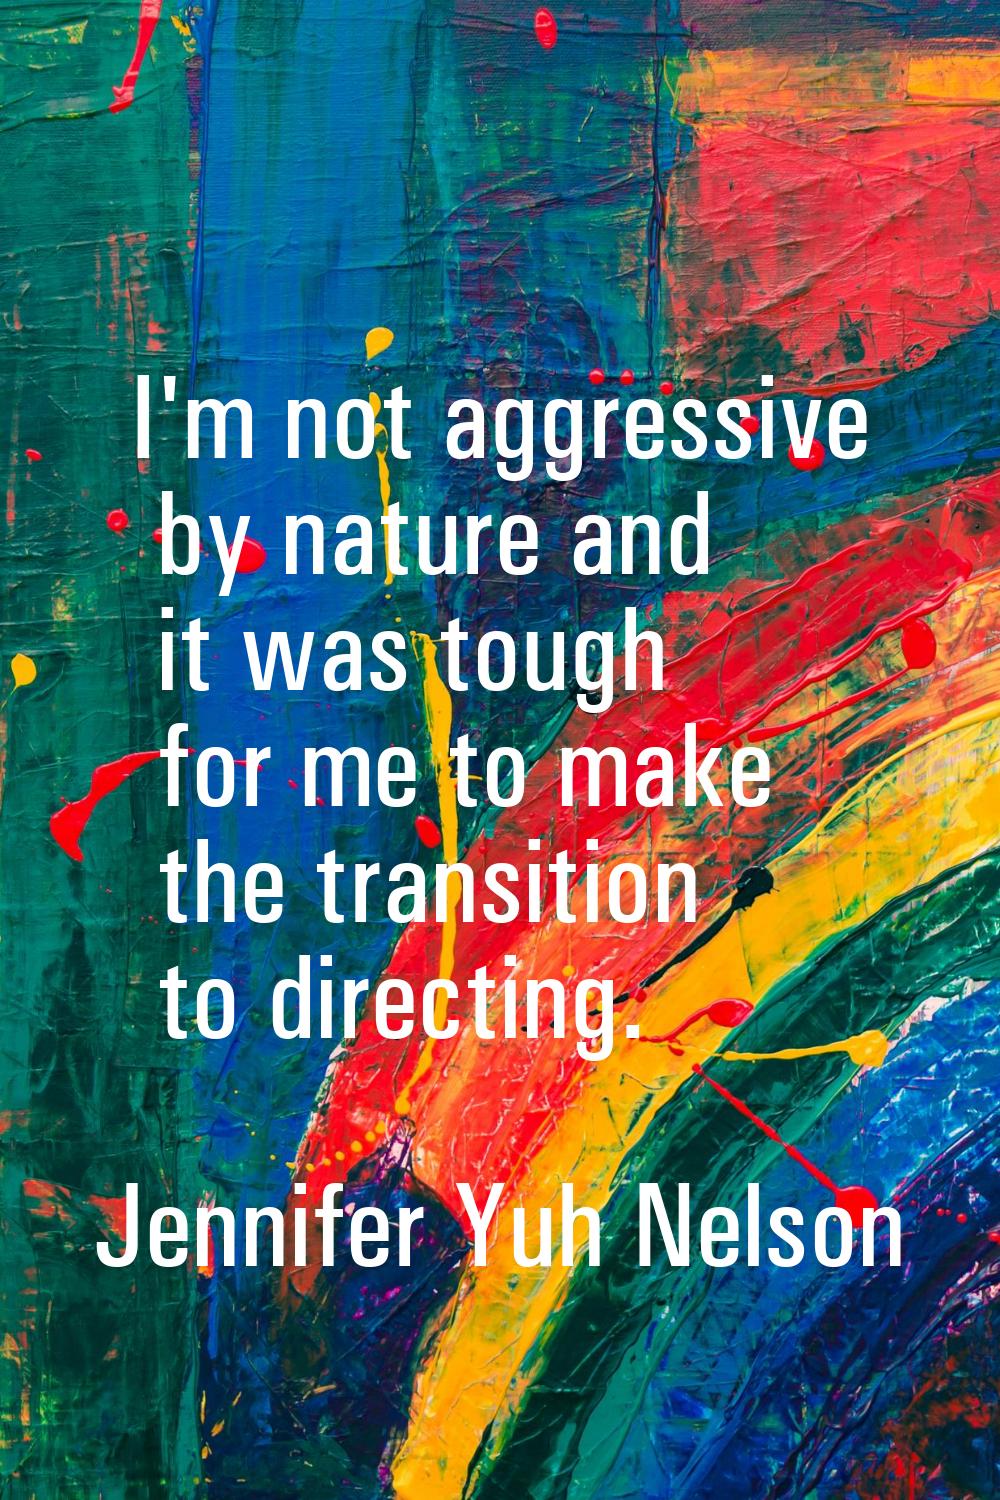 I'm not aggressive by nature and it was tough for me to make the transition to directing.